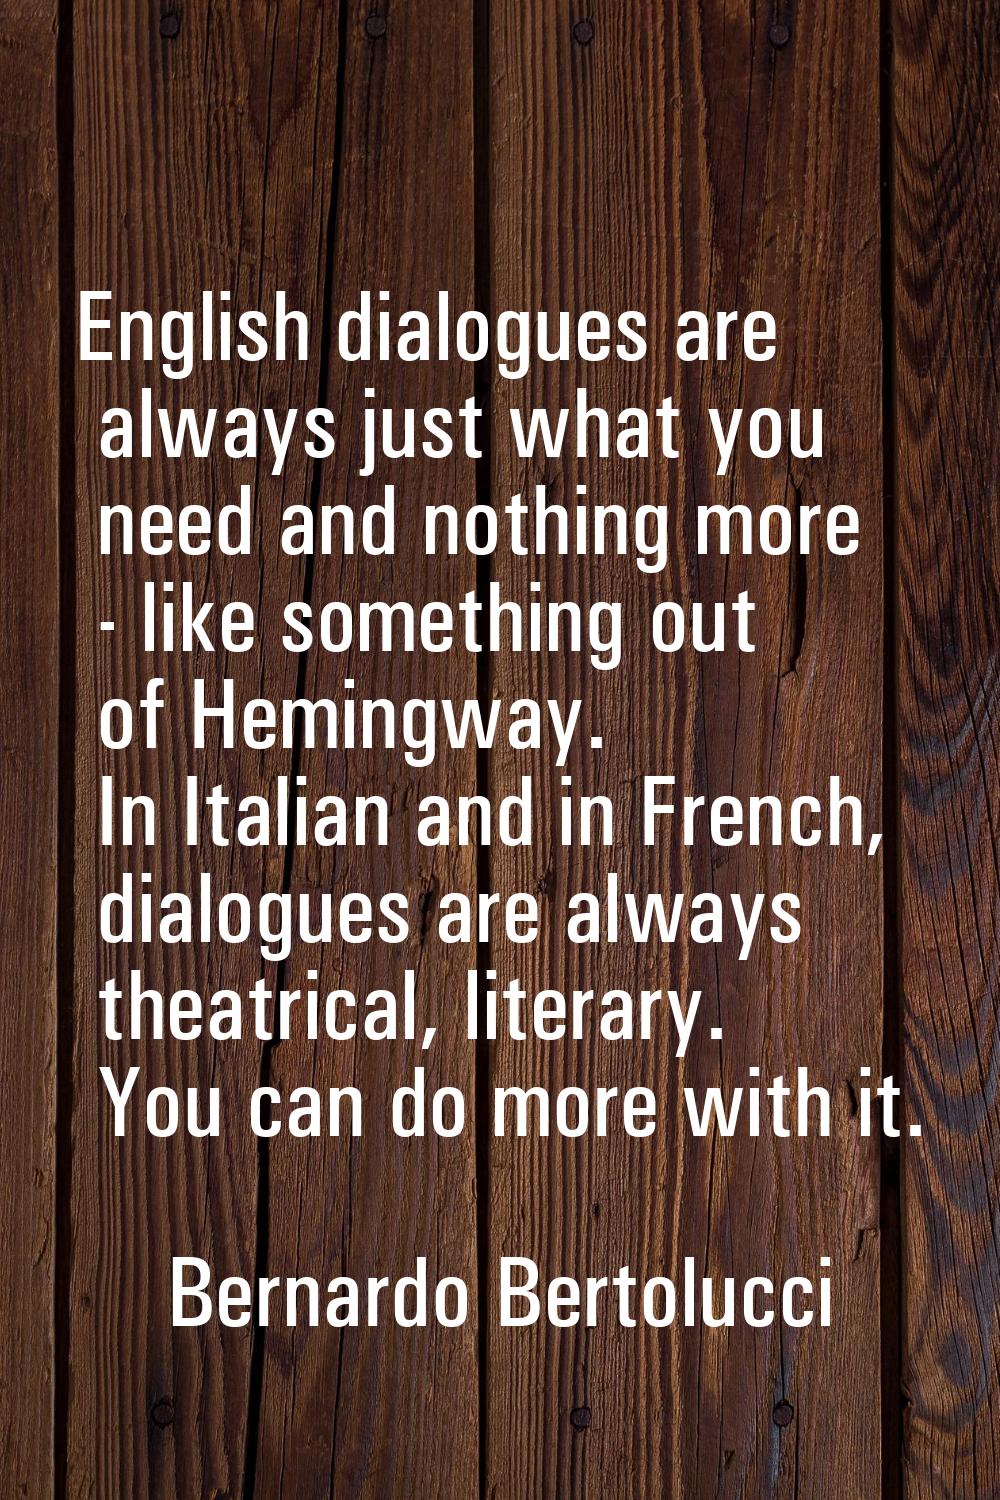 English dialogues are always just what you need and nothing more - like something out of Hemingway.